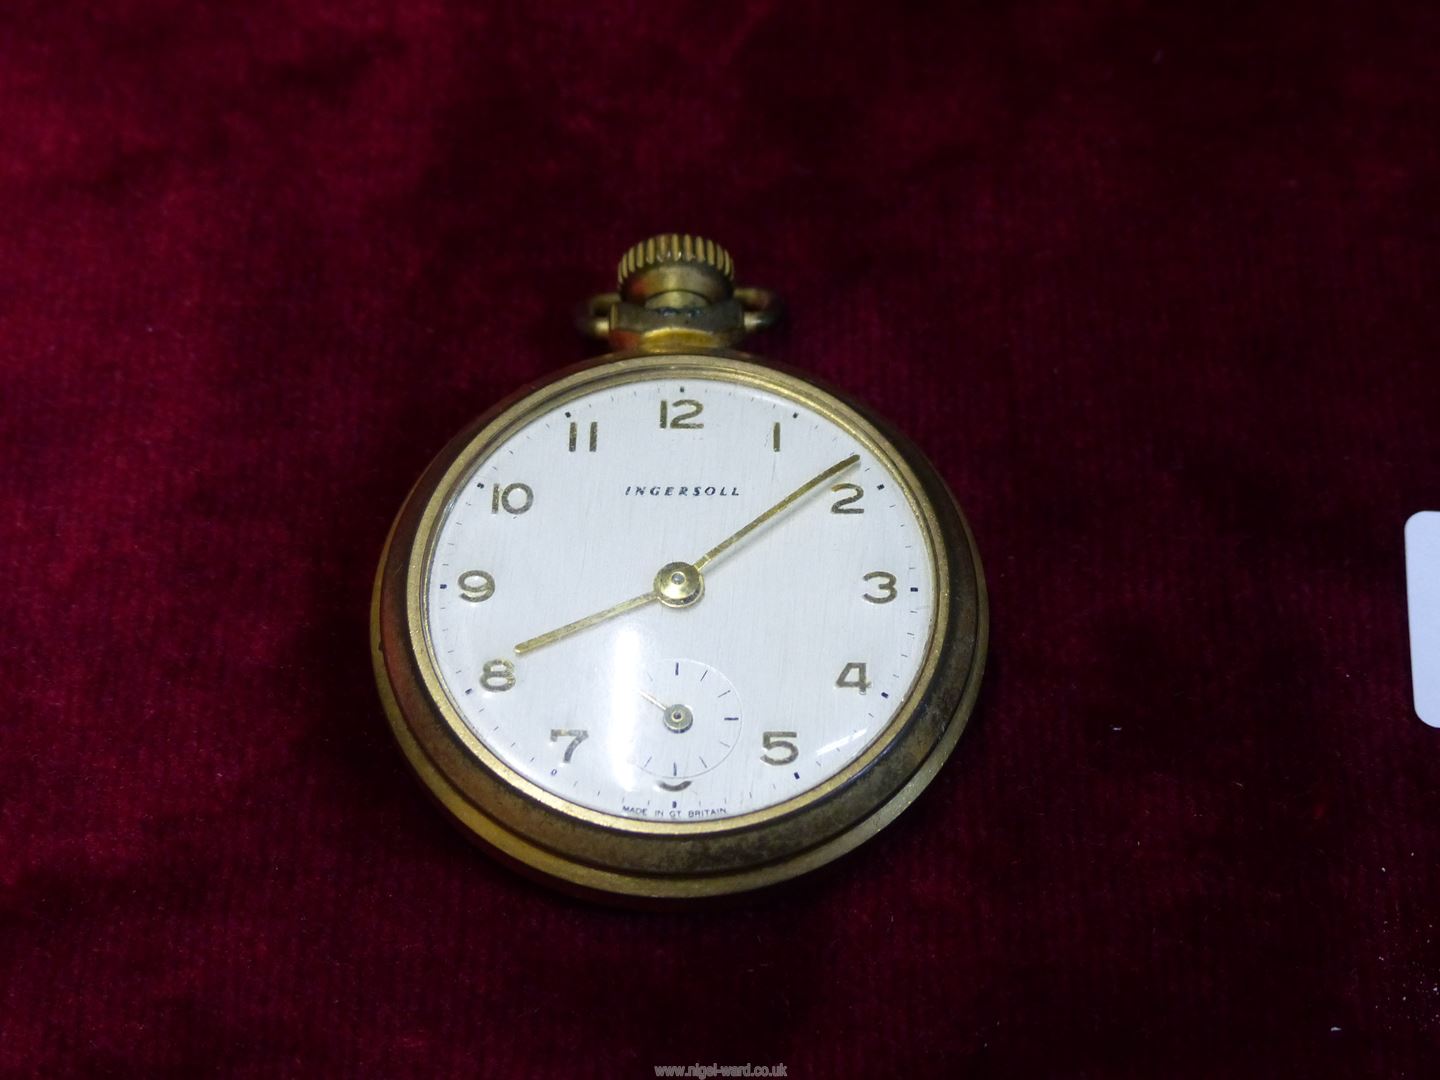 Two Ingersoll pocket watches, a/f. - Image 2 of 3